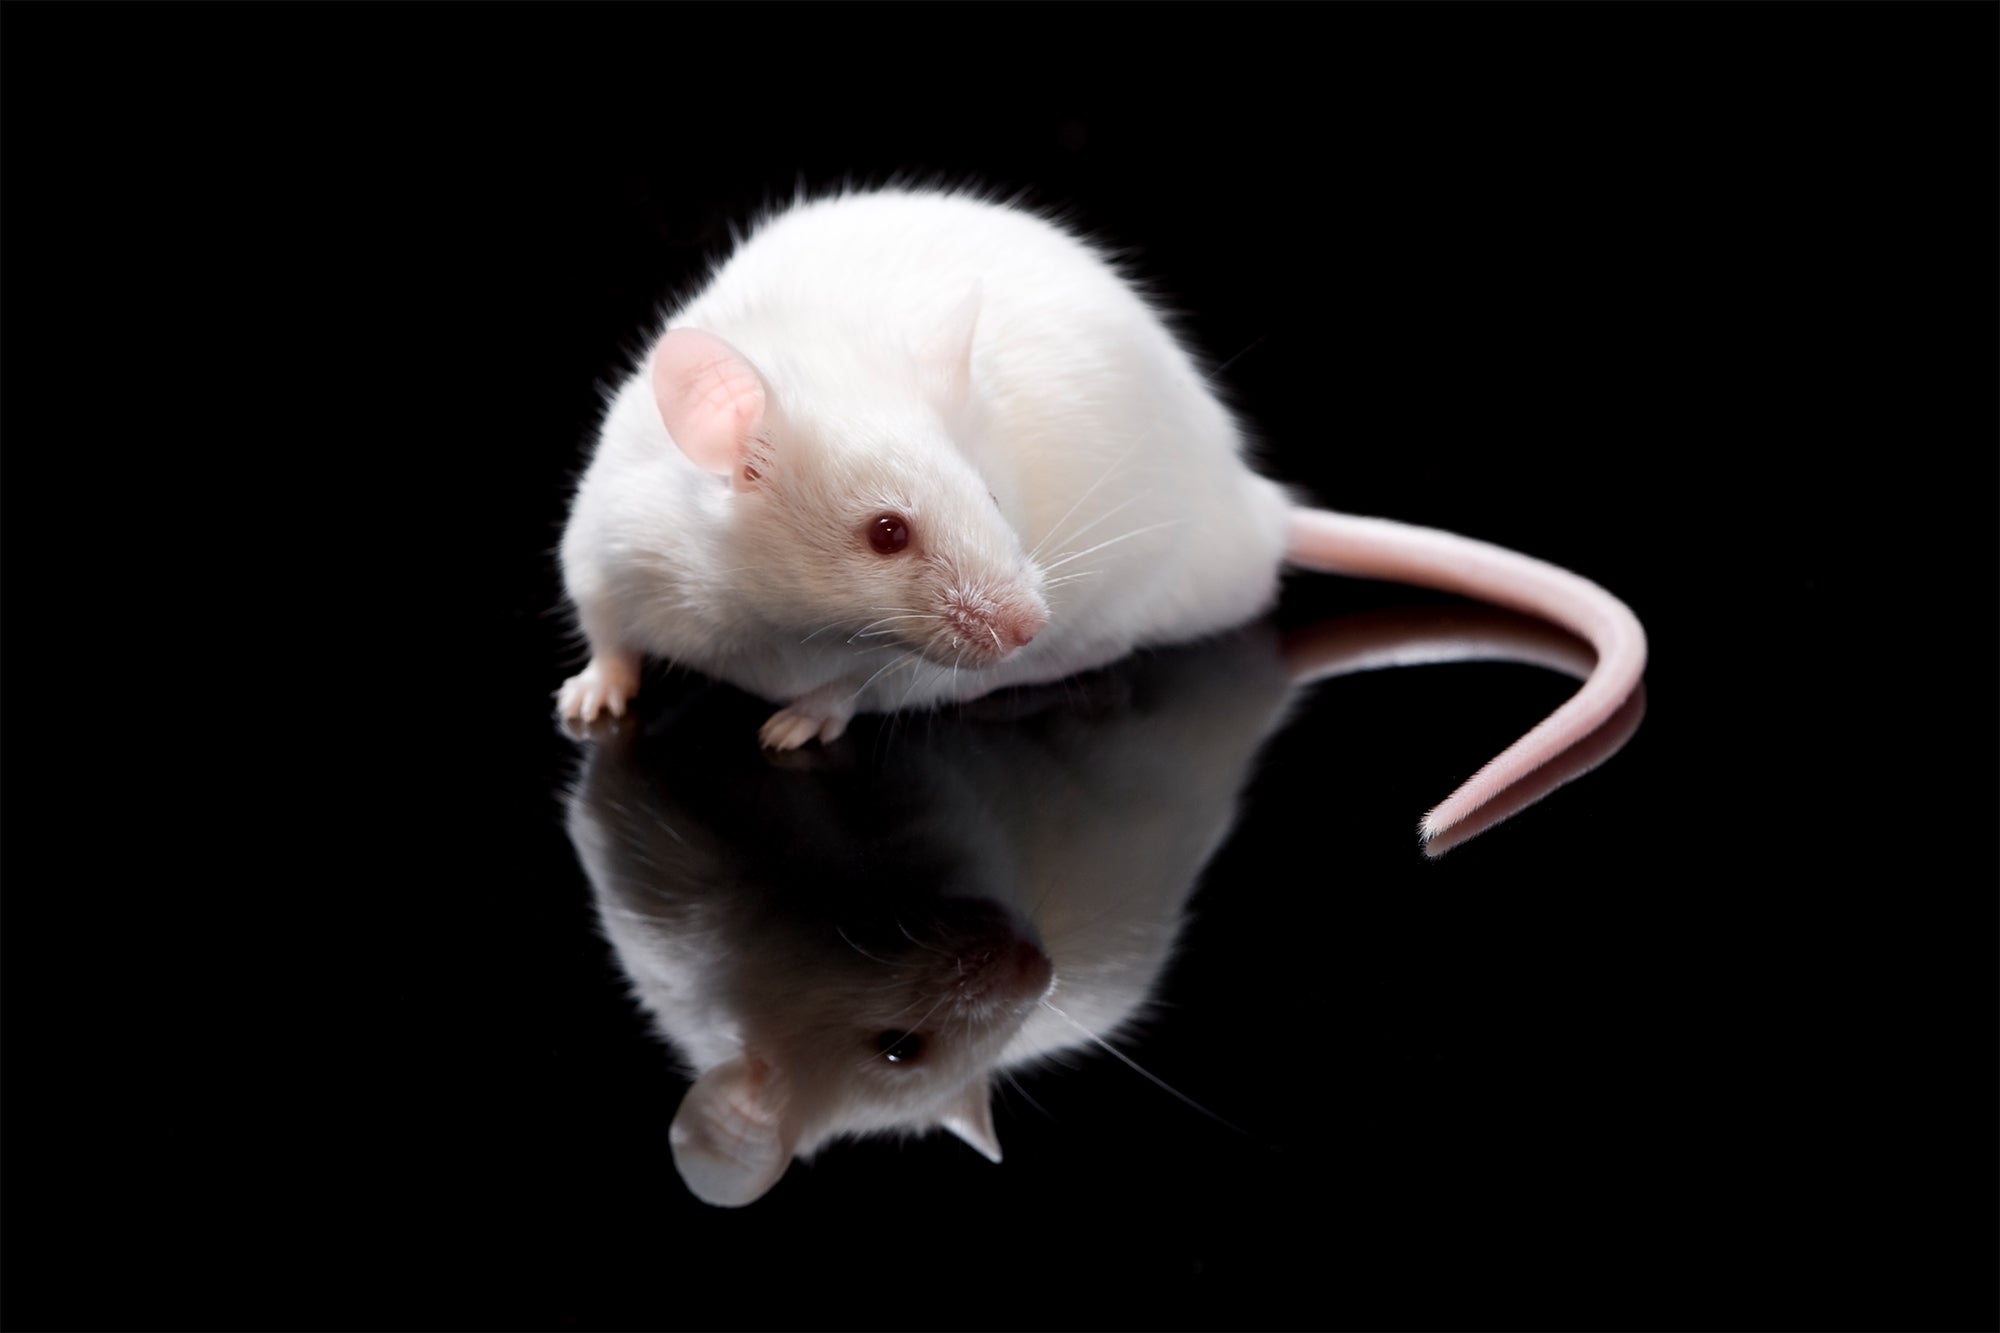 White mouse on a black background and mirrored surface